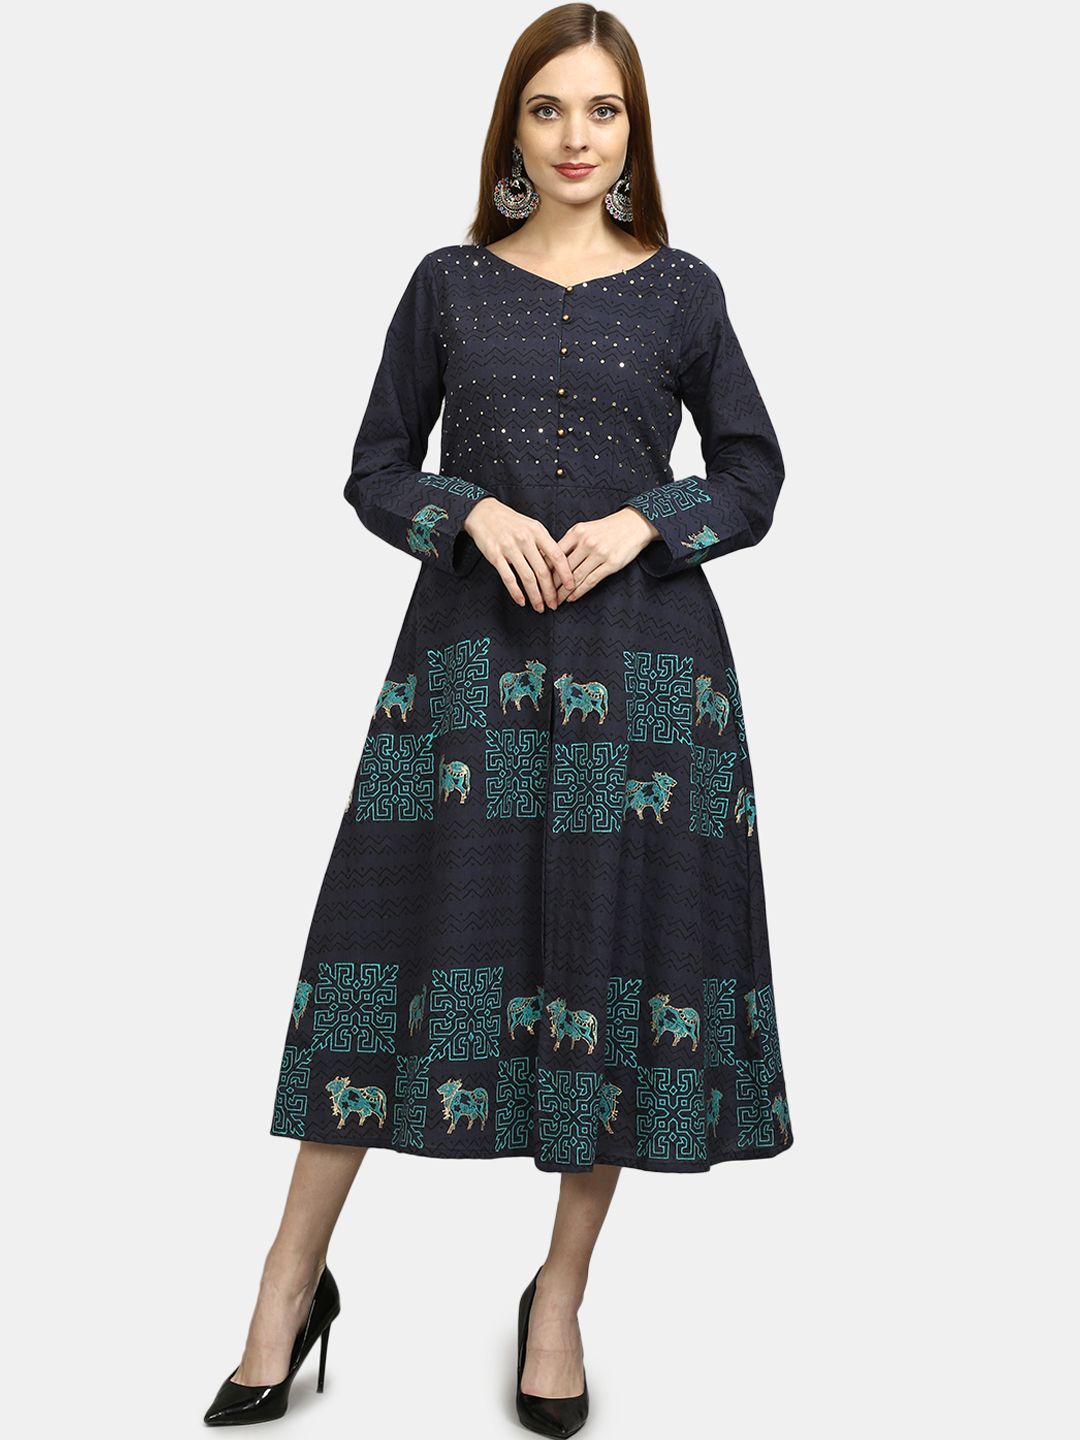 FLAVIDO Navy Blue & Teal Ethnic Motifs Printed Sequined Ethnic Cotton Midi A-line Dress Price in India